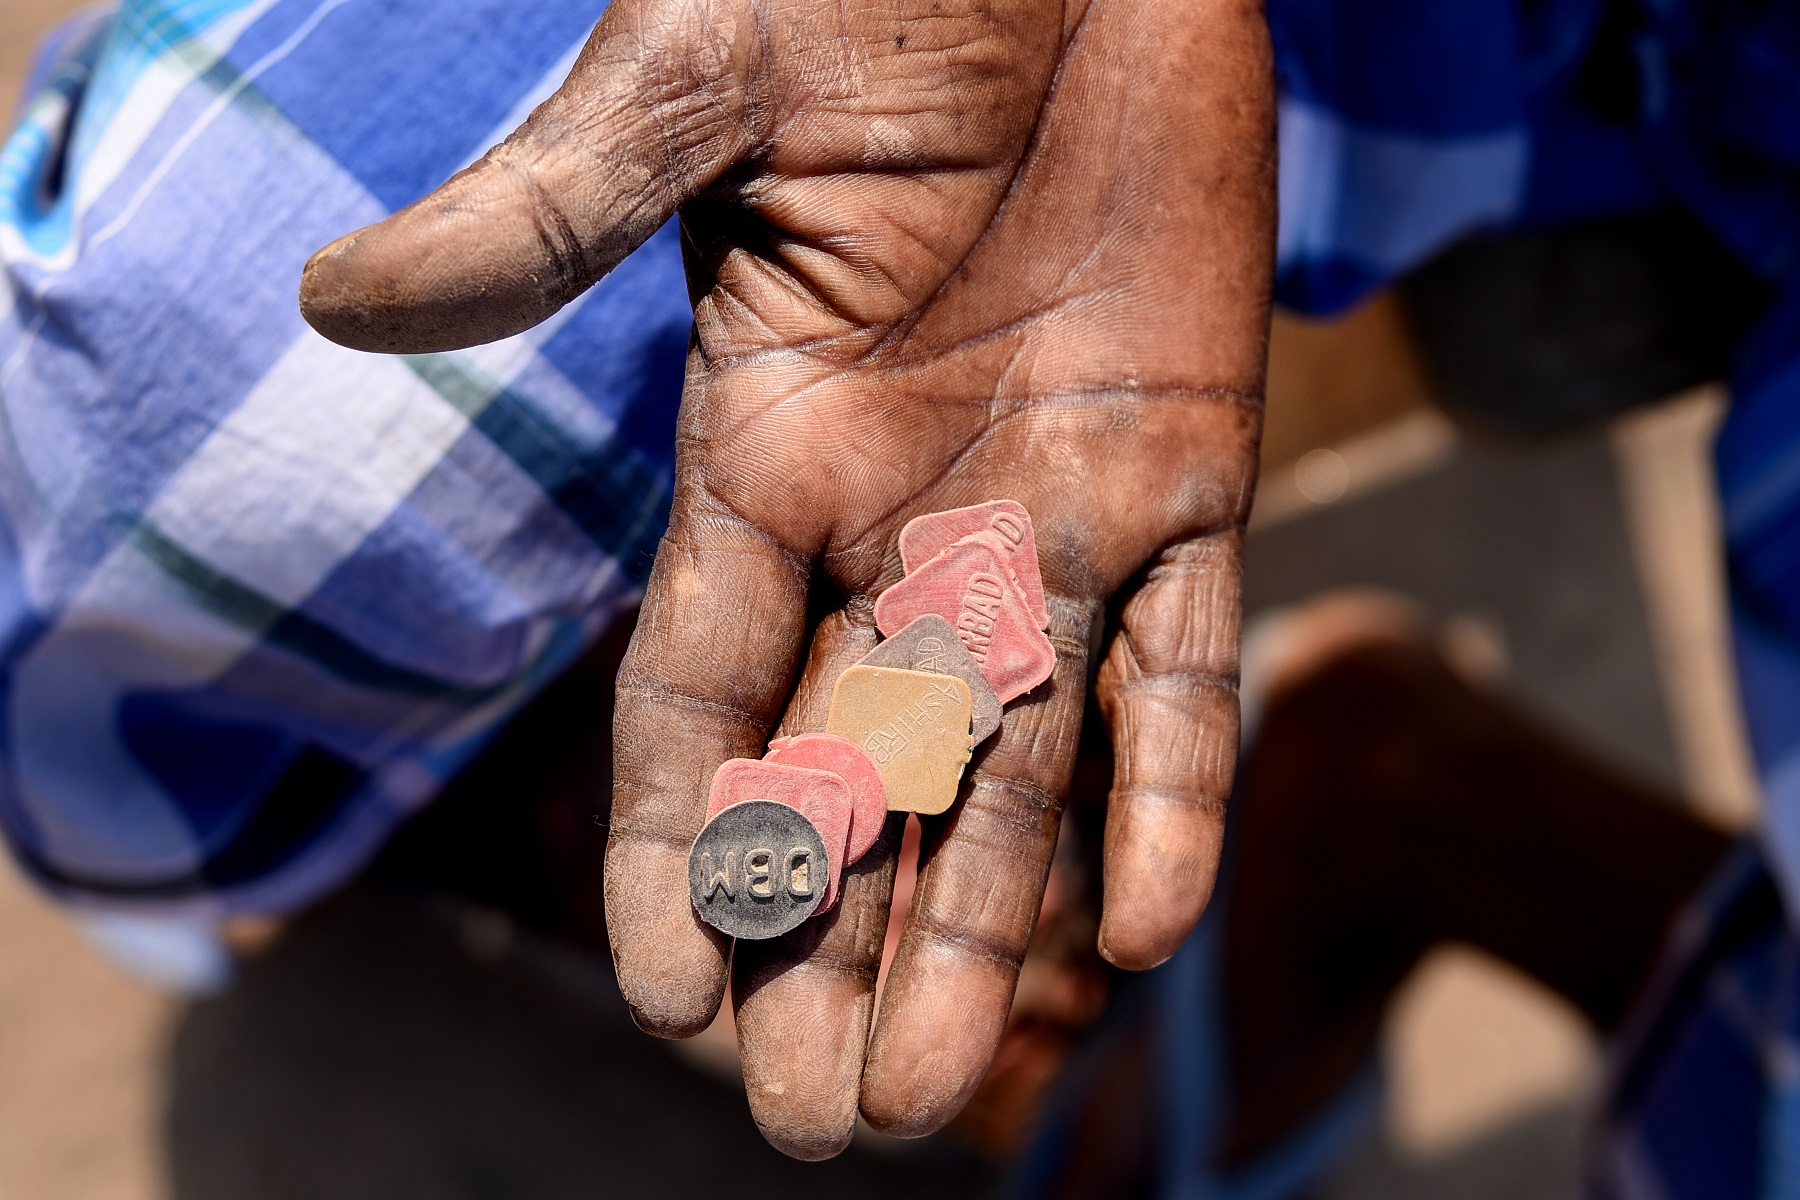 A worker counts tokens—he will get paid at the end of day based on how many of these he has. The workers’ daily wages are based on the number of bricks made or carried.